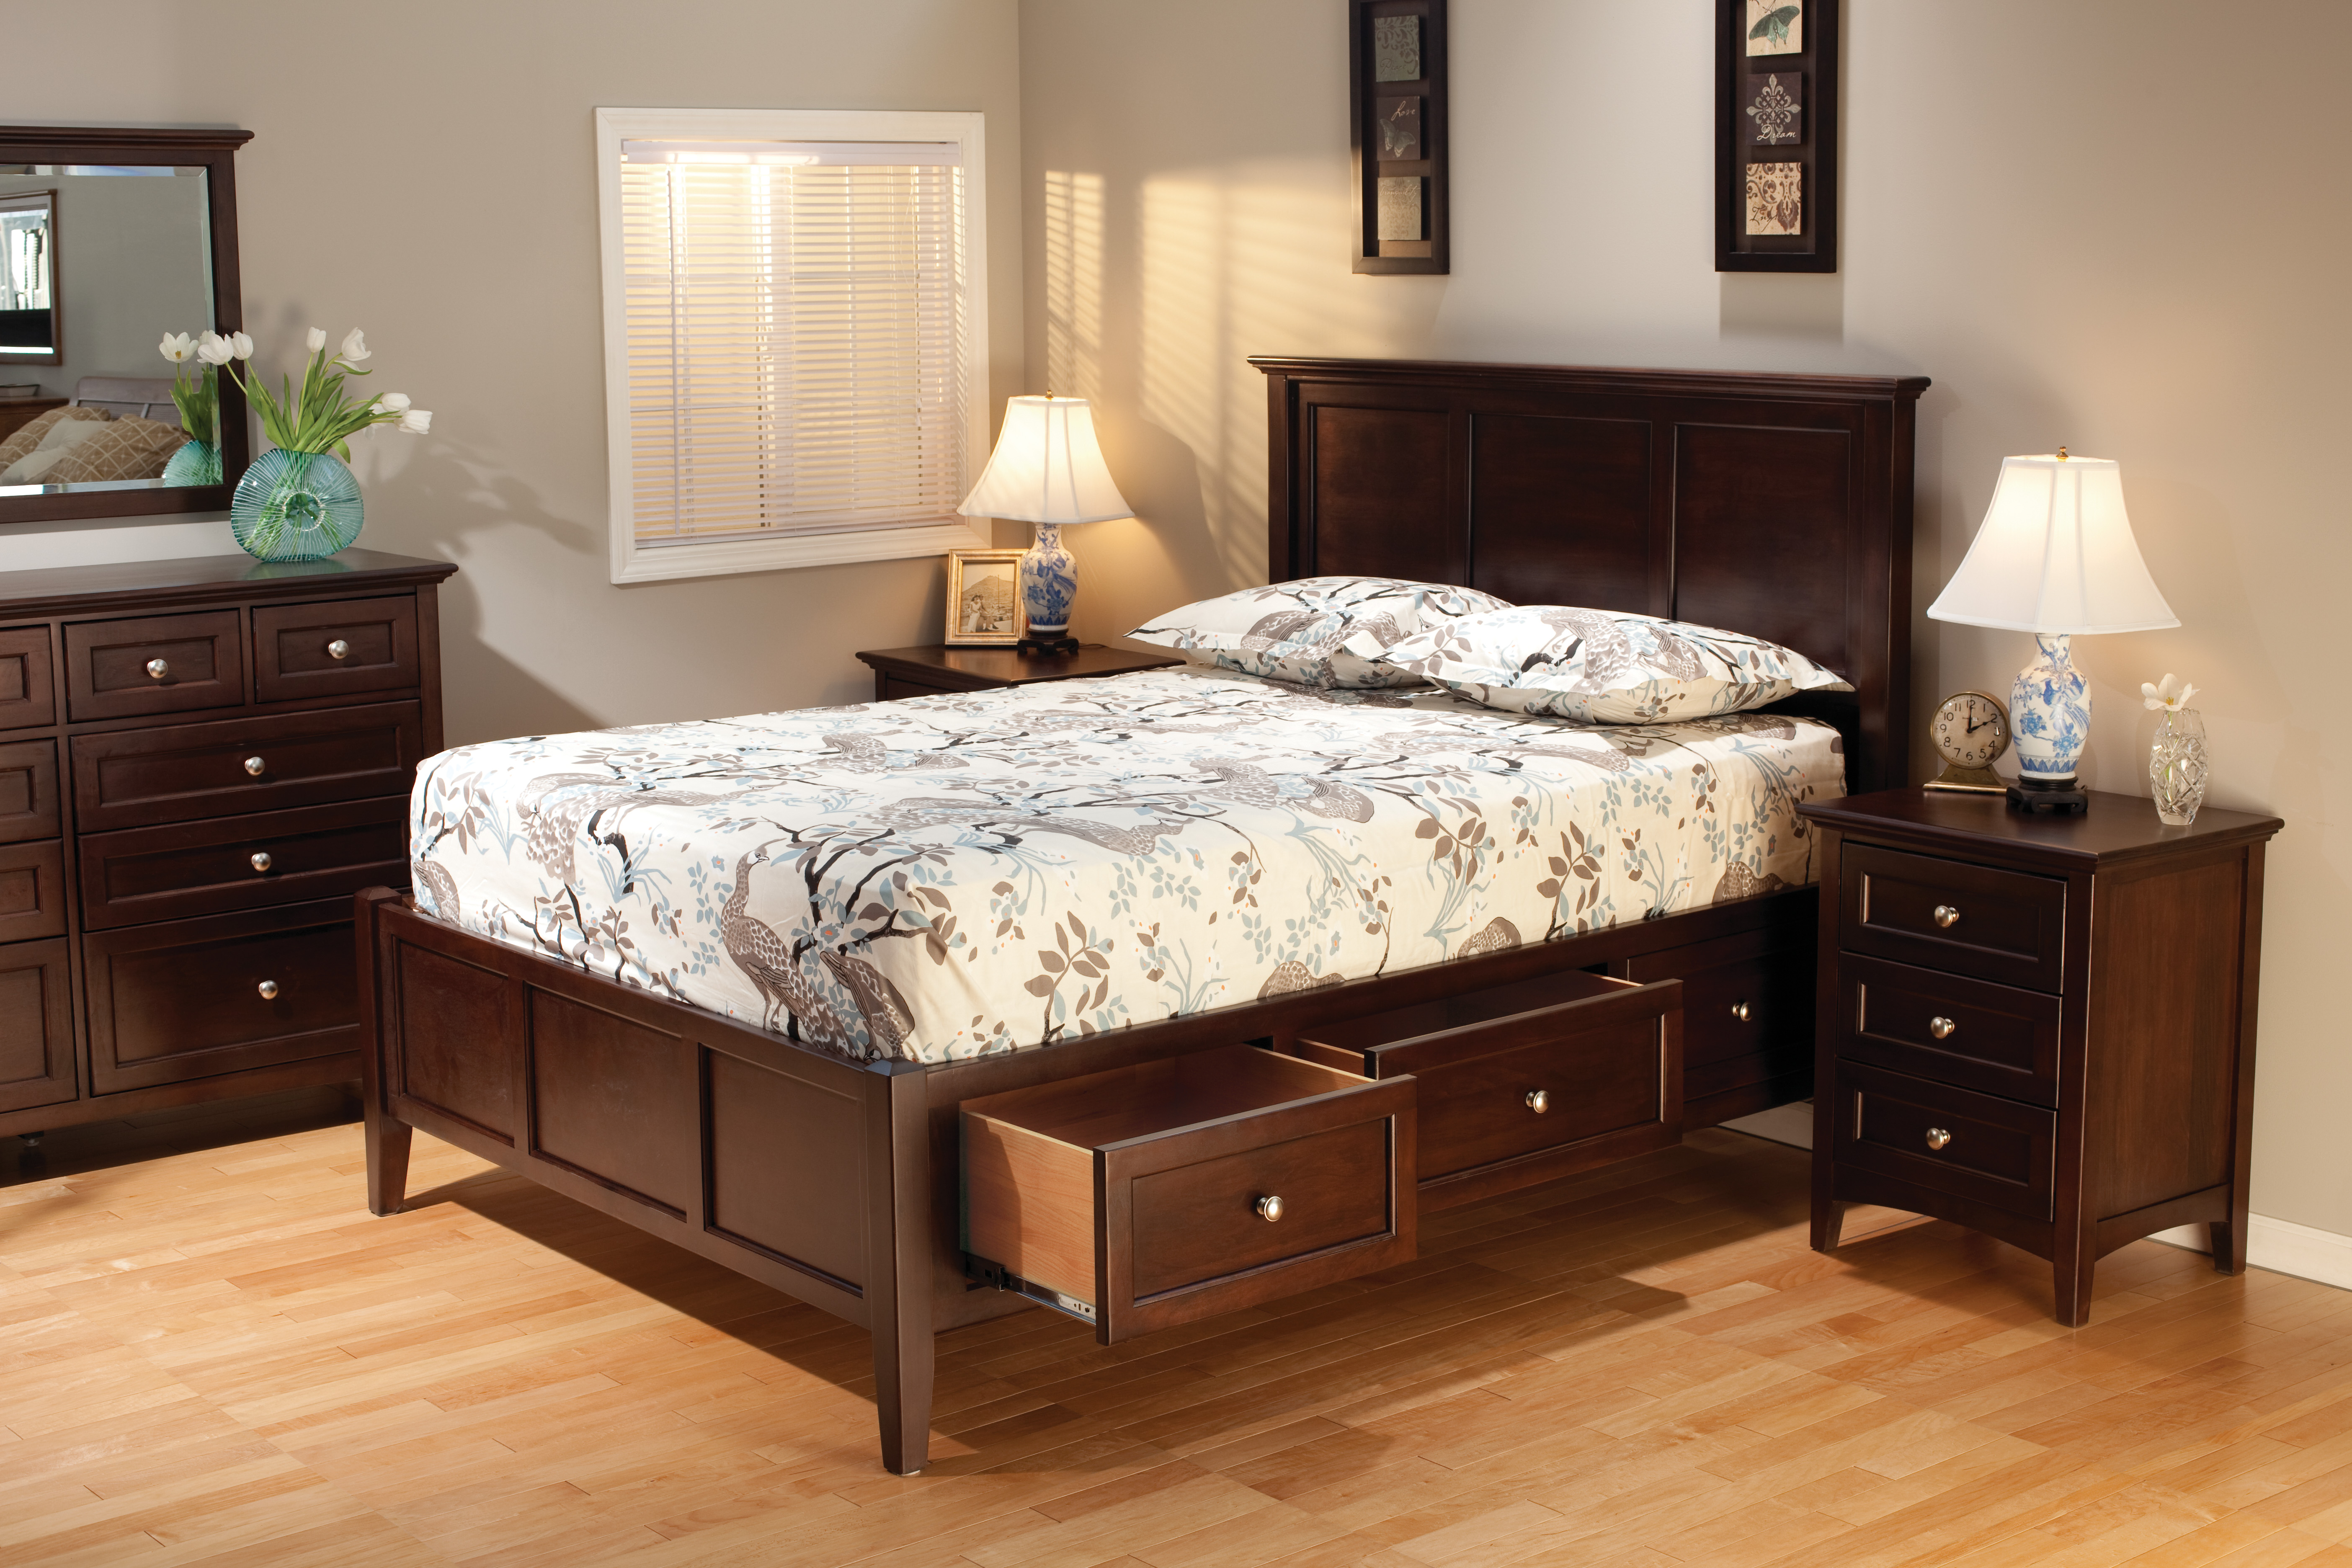 different types wooden bedroom furniture